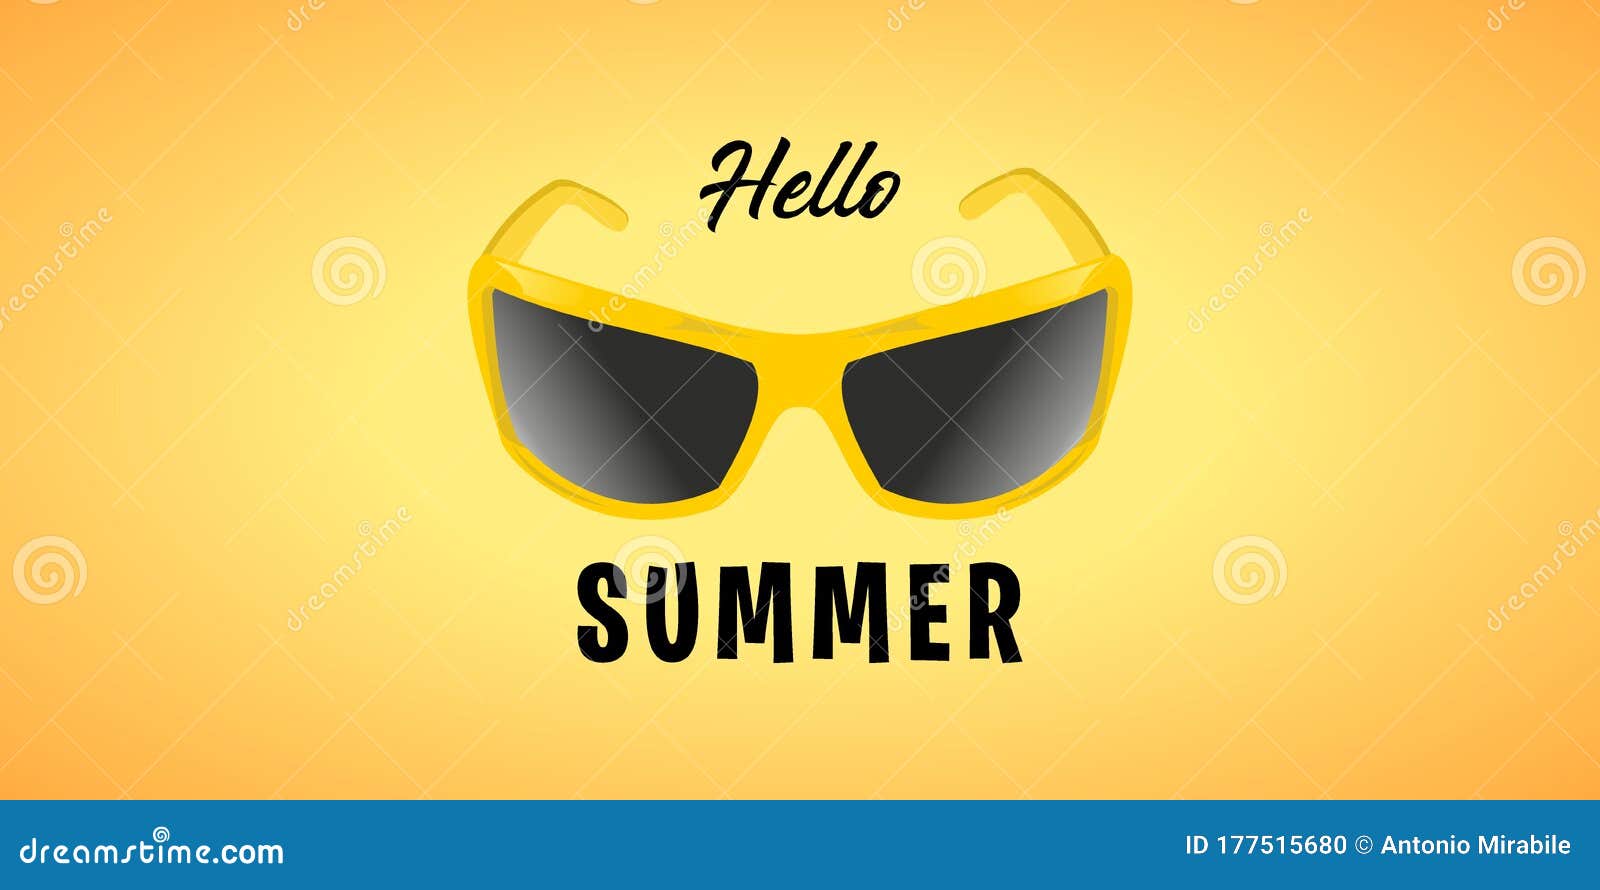 welcome summer. sunglasses om yellow